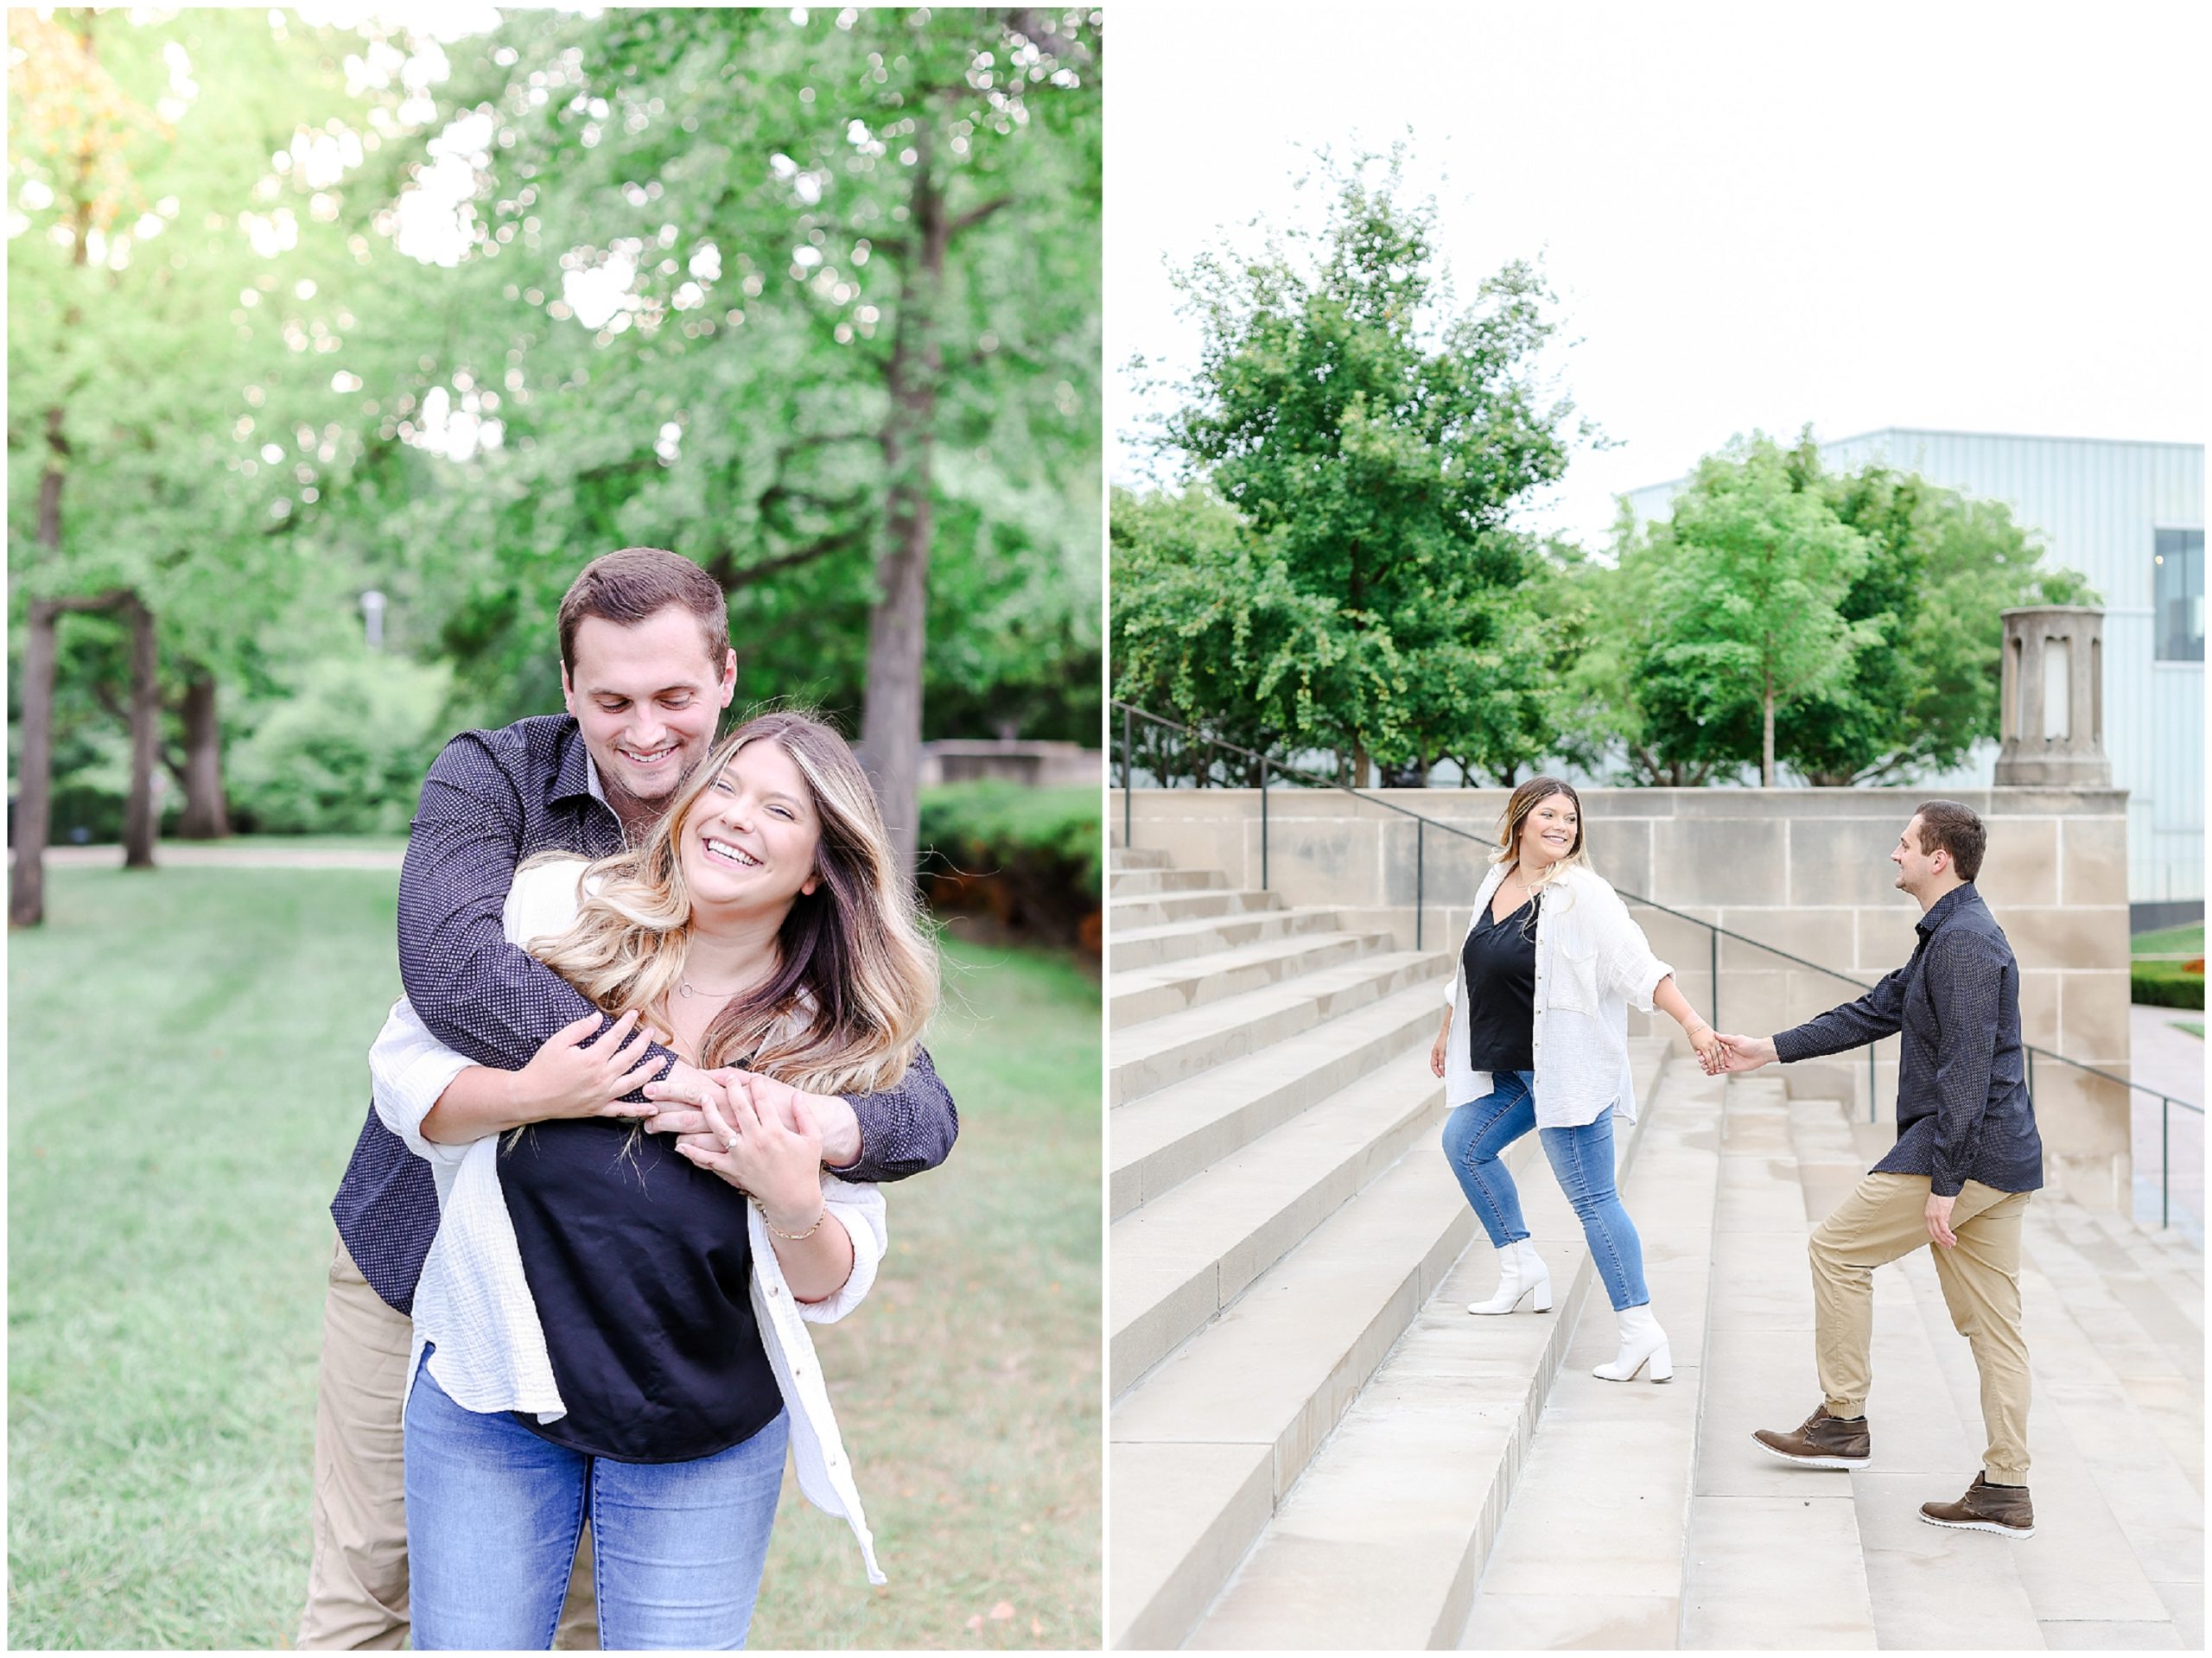 KC Engagement Session for Molly & Austin at the Kansas City Nelson Atkins Museum - Hotel Kansas City Wedding Venue - Where to Get Married in Kansas - Family Portrait Photography - walking up stairs and hugging 